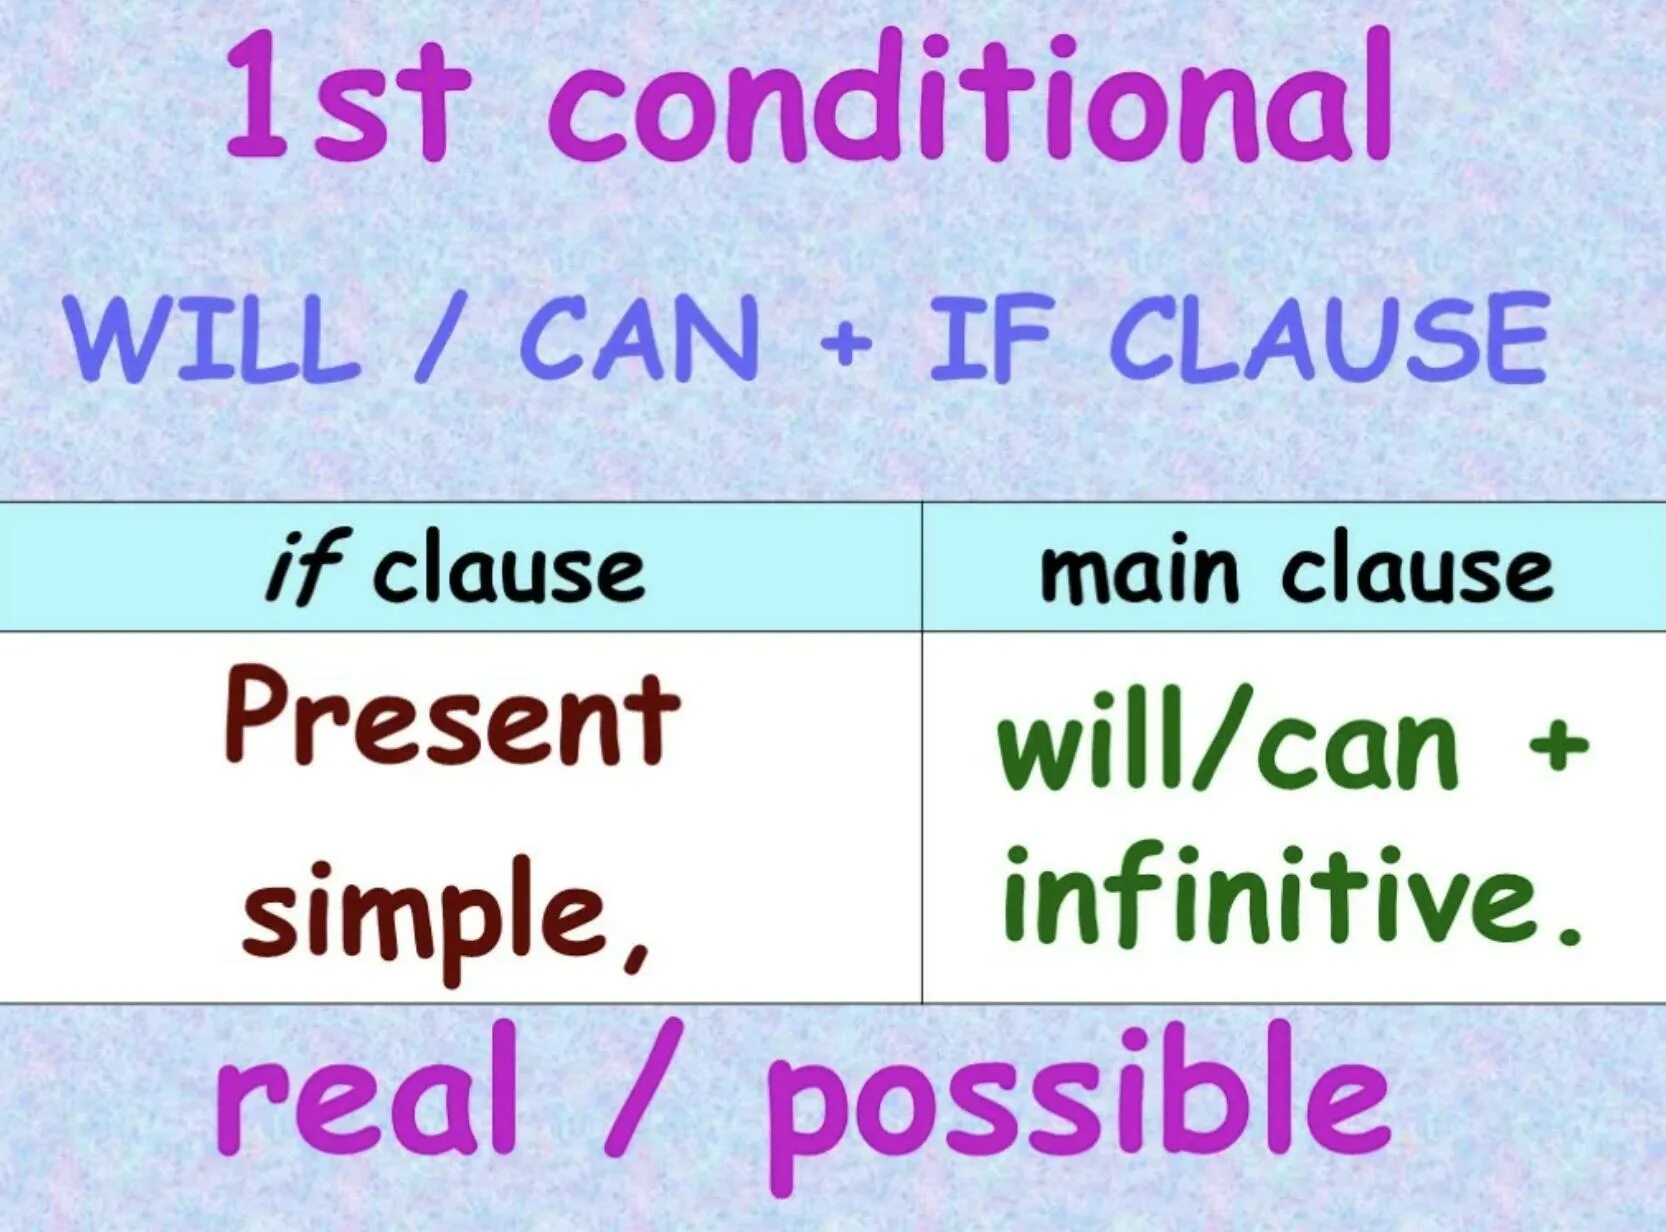 First conditional wordwall. Zero and 1st conditional правило. First conditional правило. Conditional 1. Схема 1st conditional.